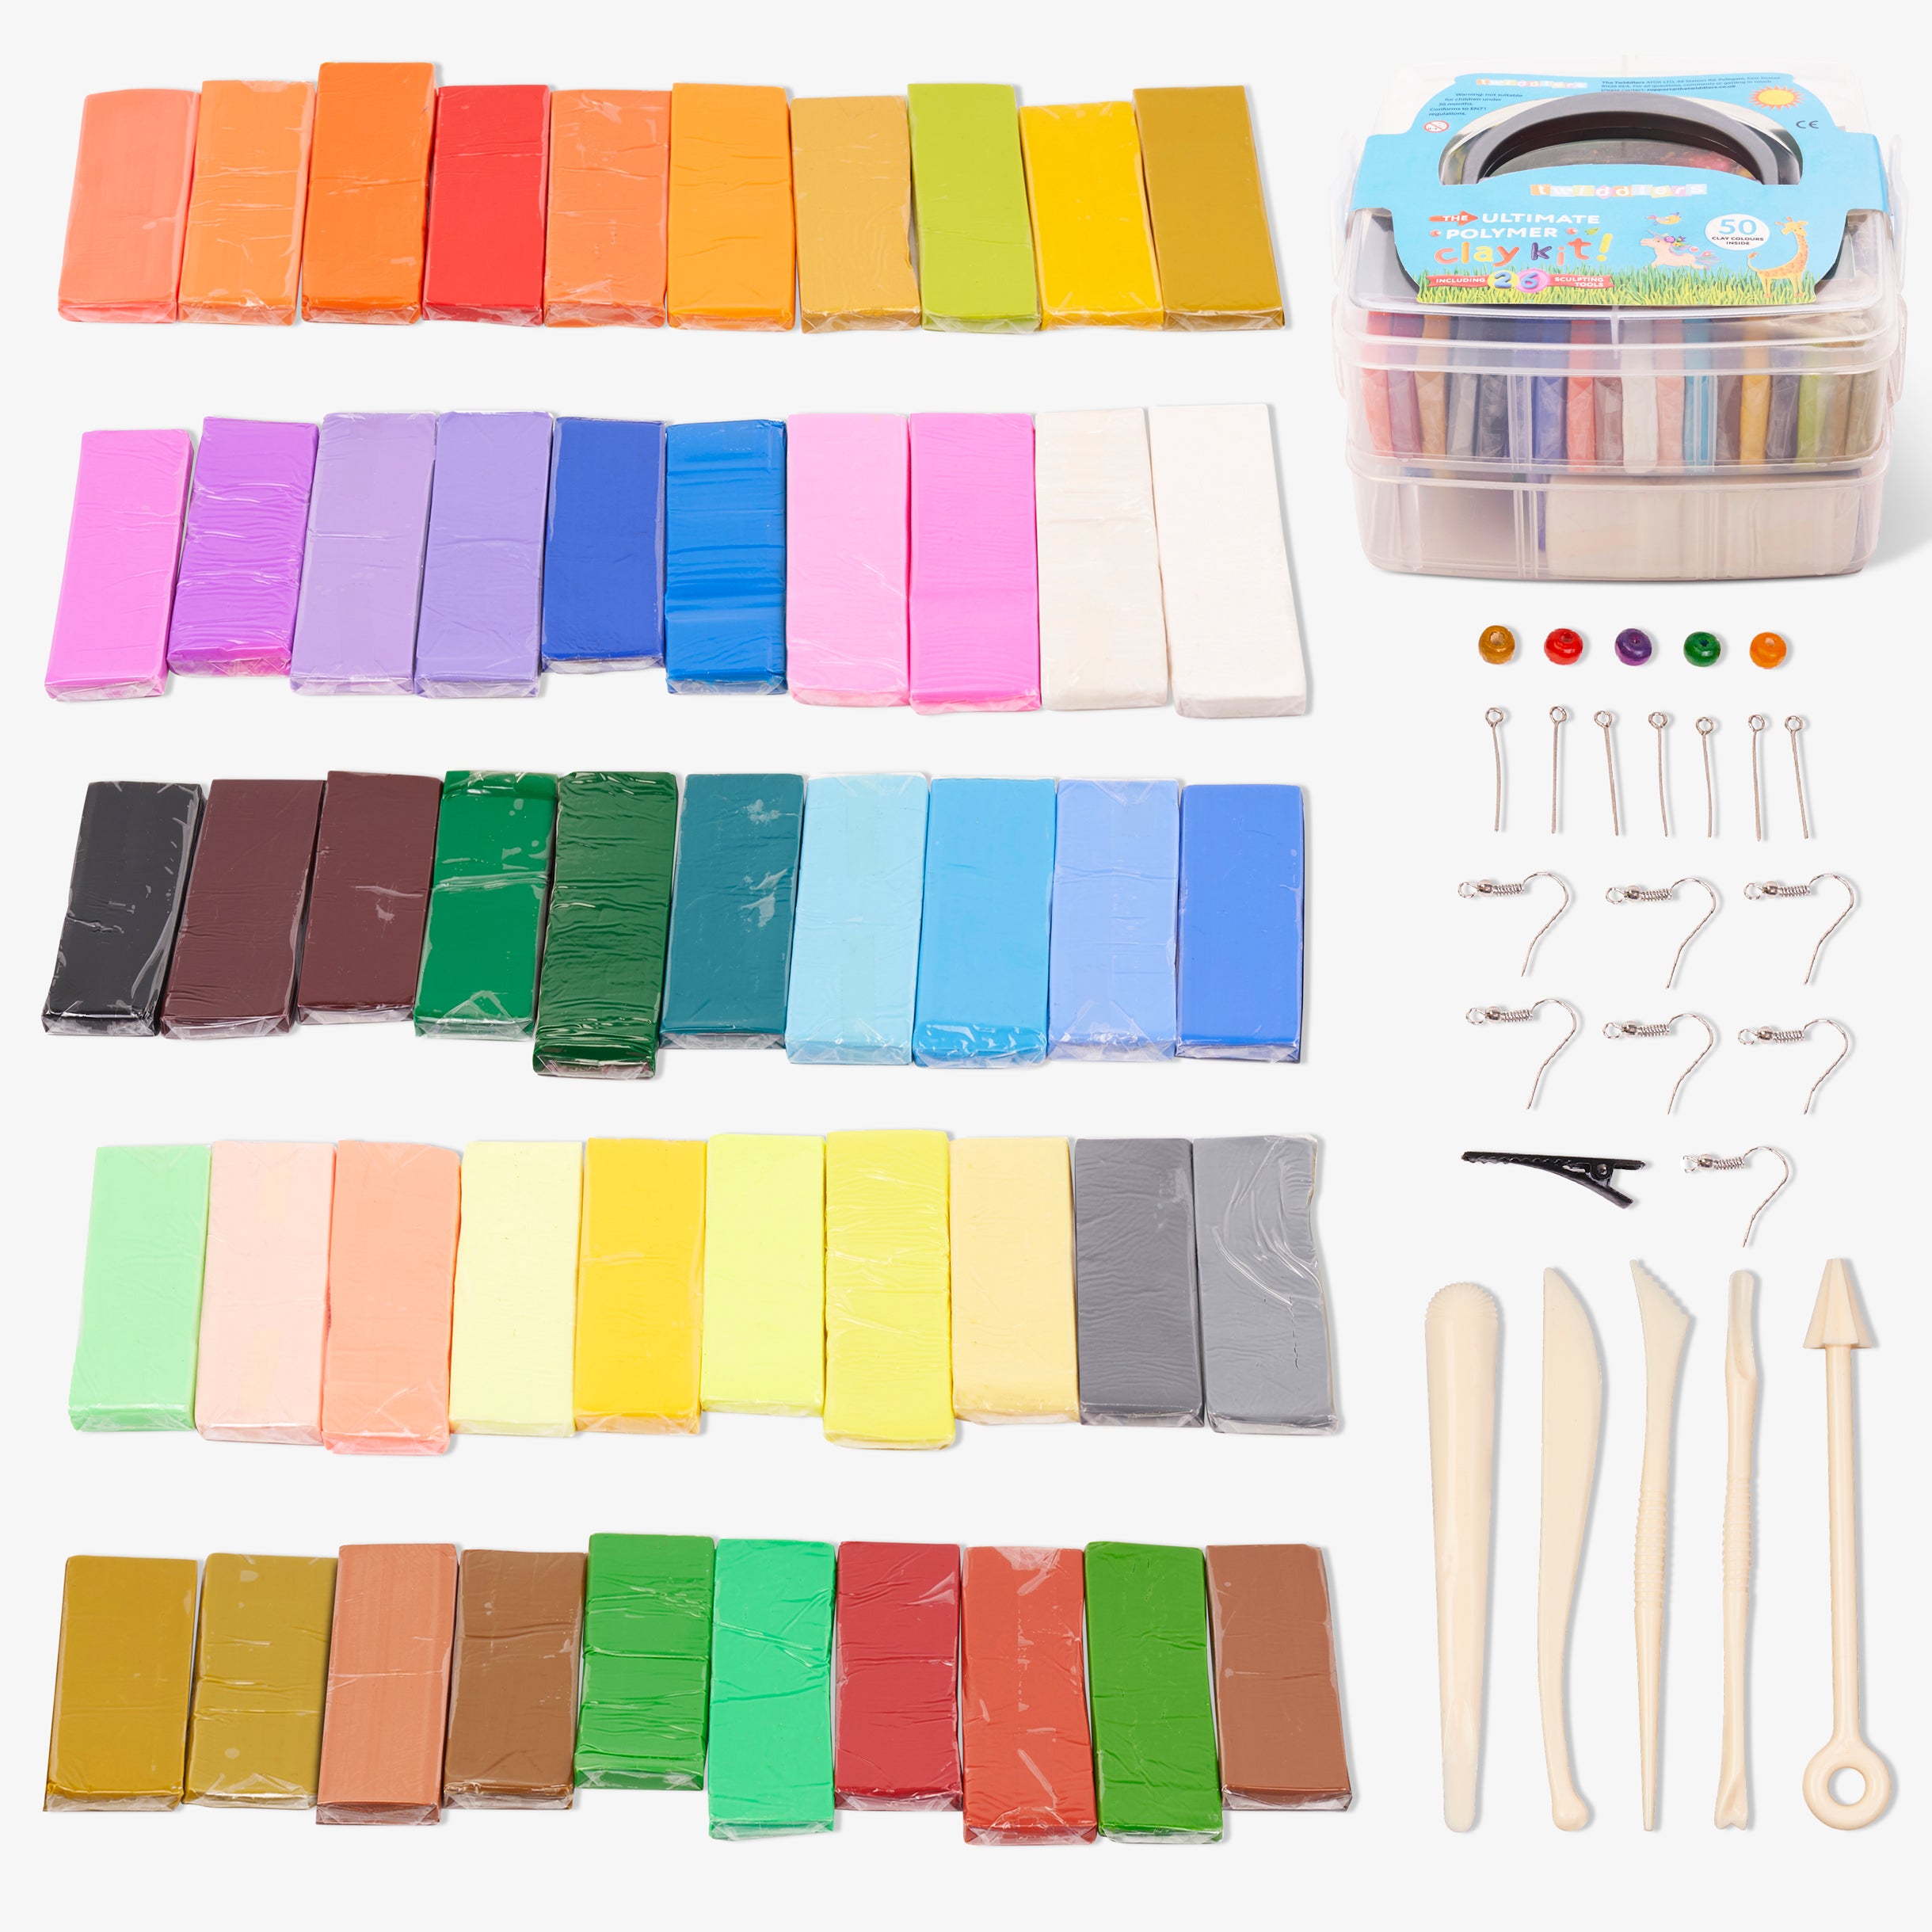 88pcs Clay Modelling Kit with Accessories